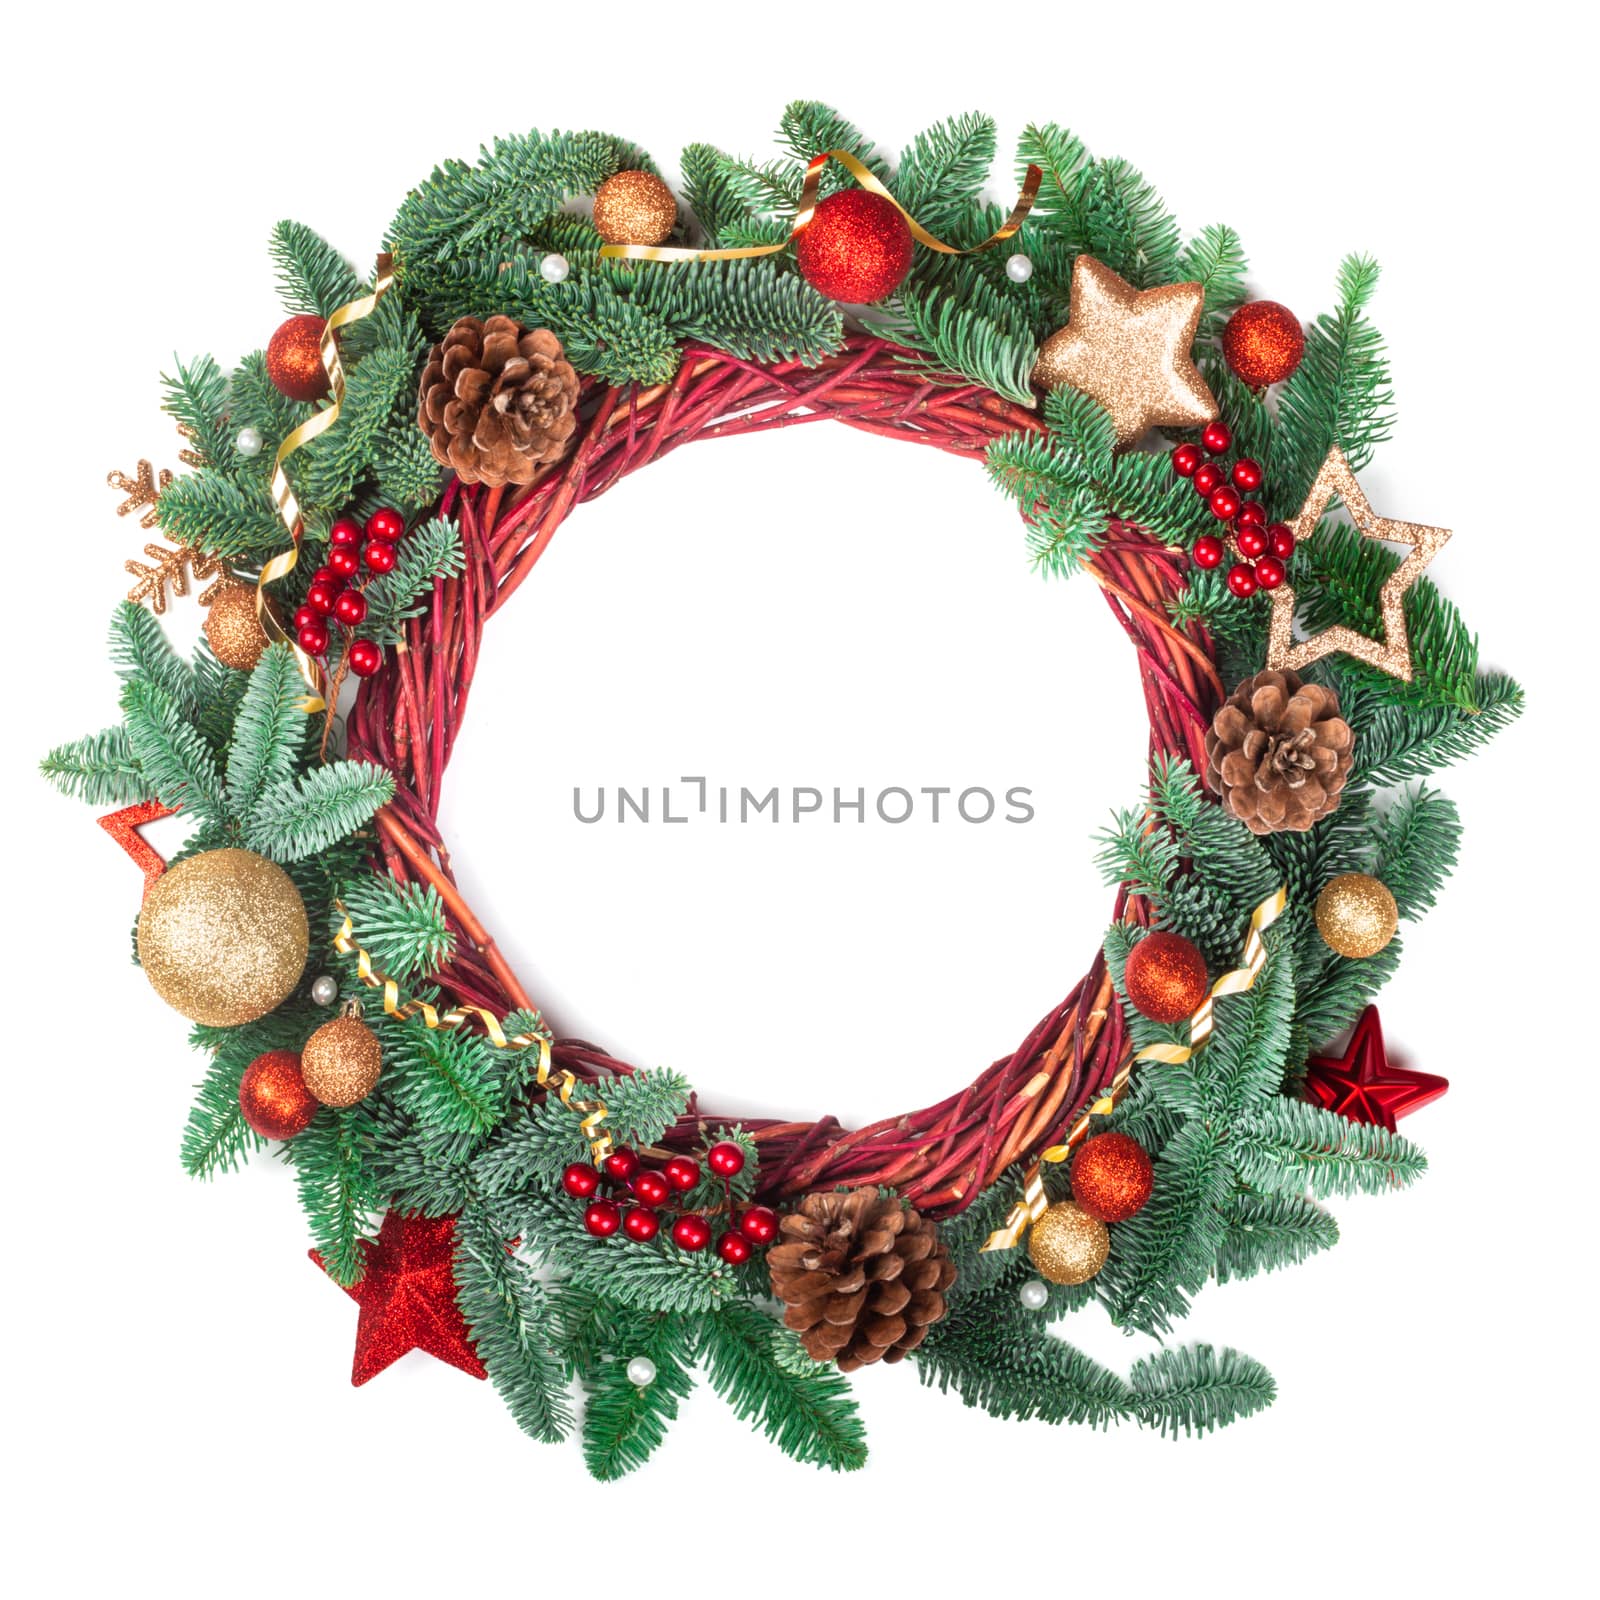 Decorated Christmas wreath with pine cones and ornaments red and golden baubles stars and holly berries isolated on white background